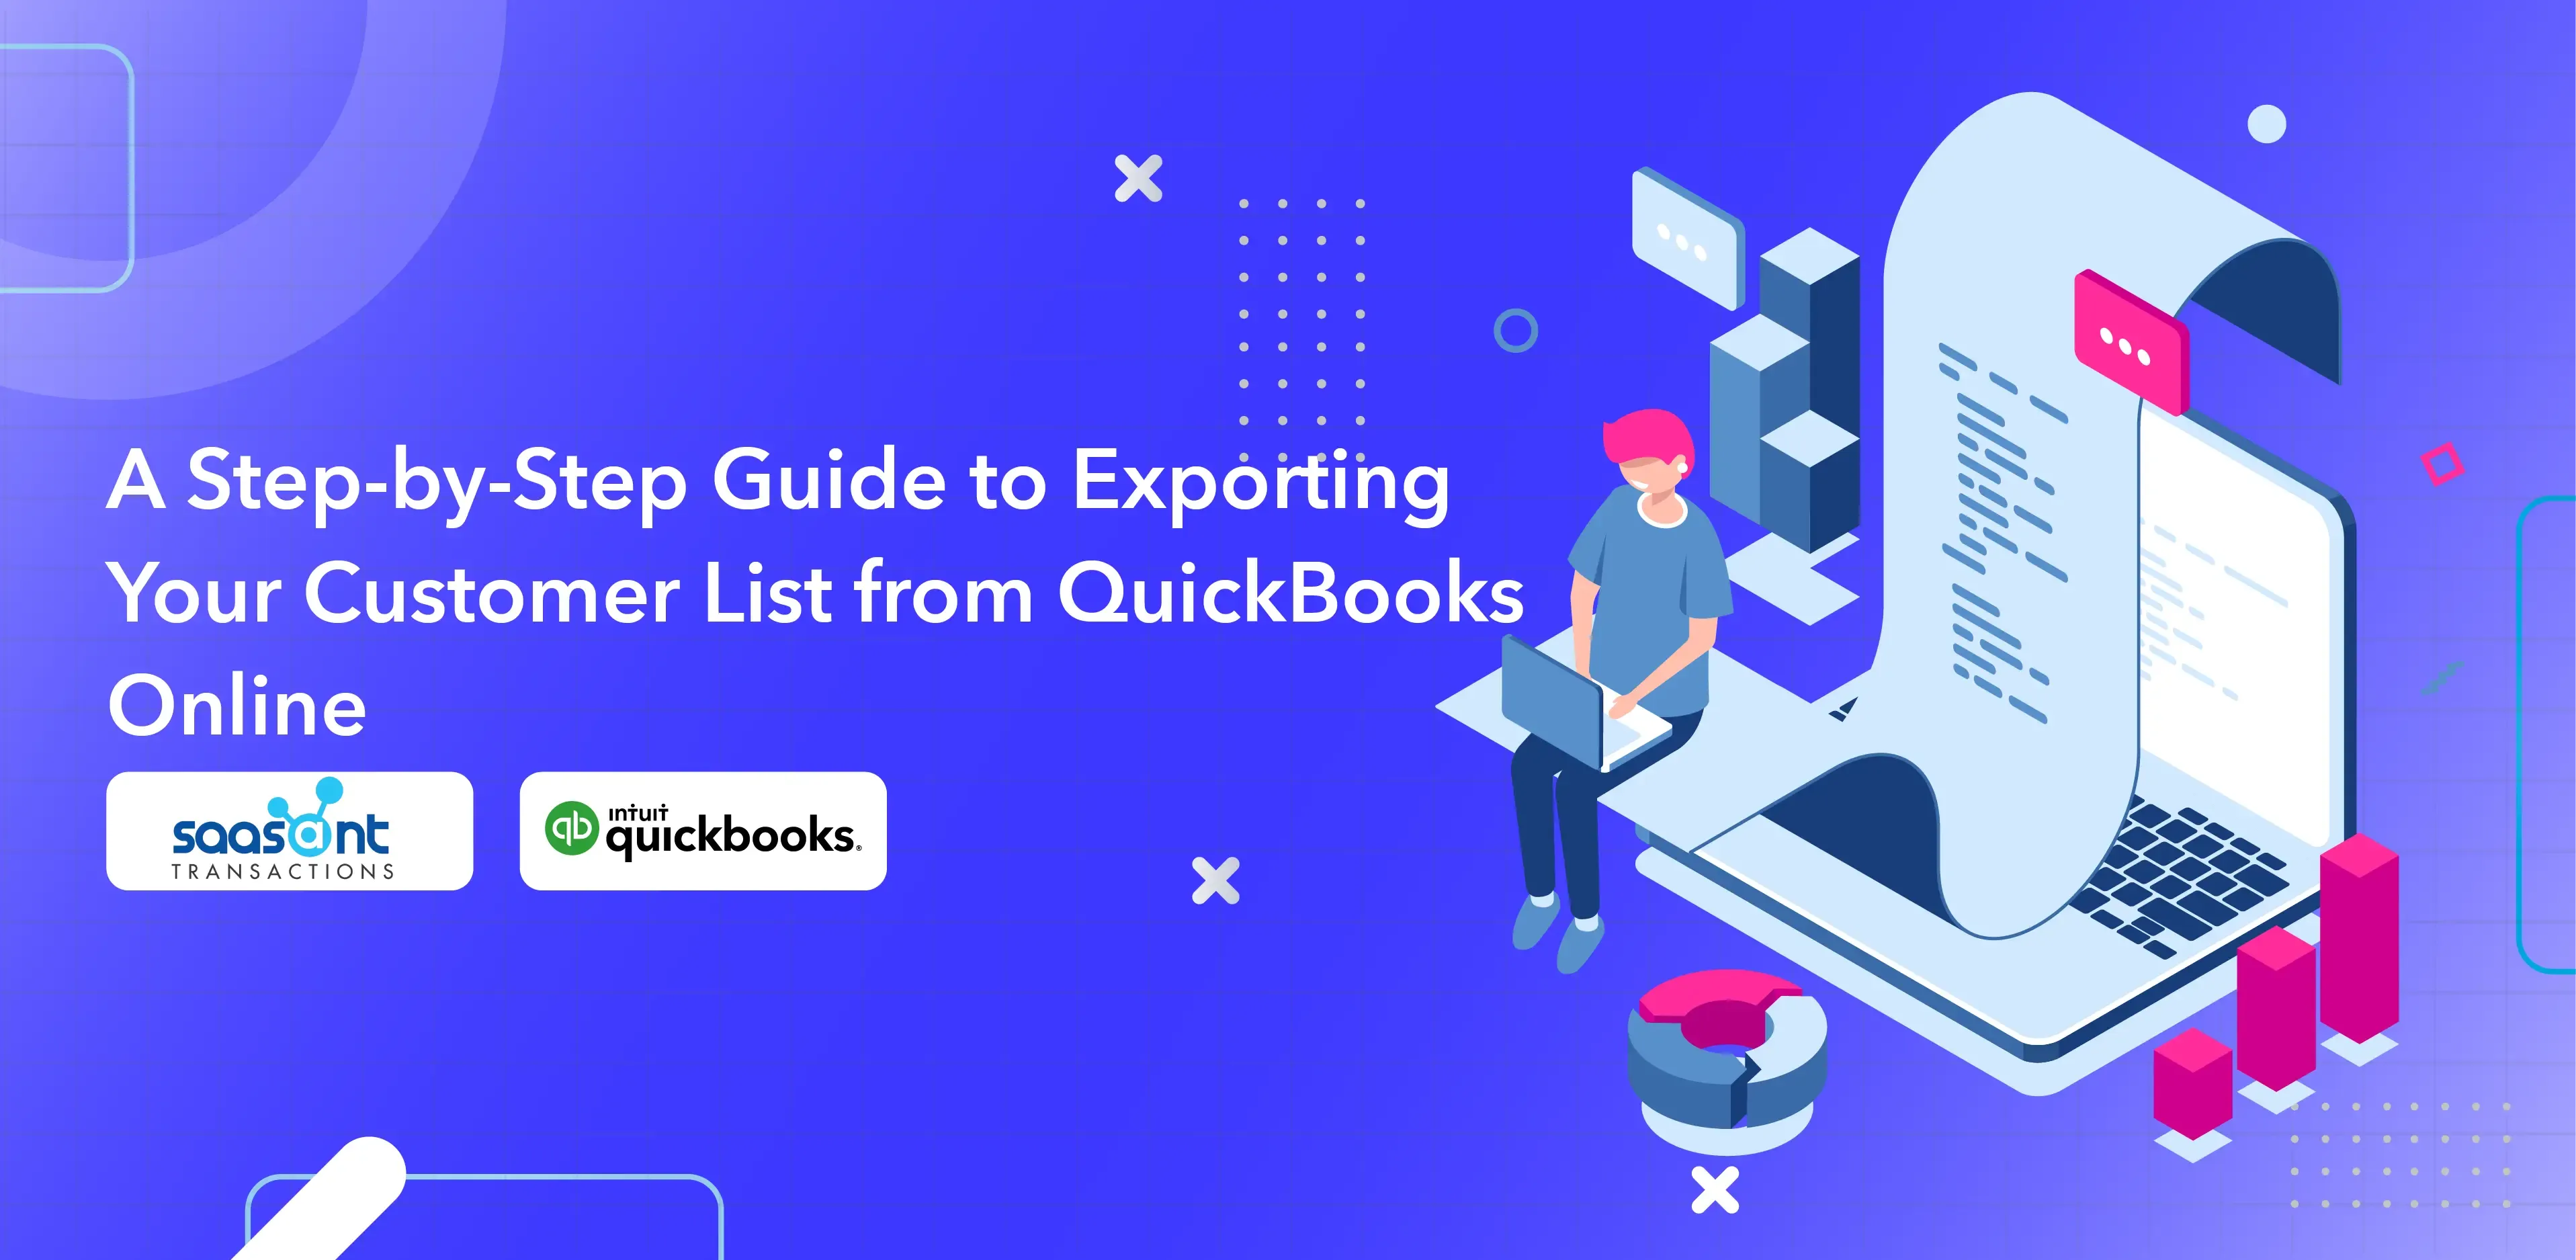 A-Step-by-Step-Guide-to-Exporting-Your-Customer-List-from-QuickBooks-Online-01.webp